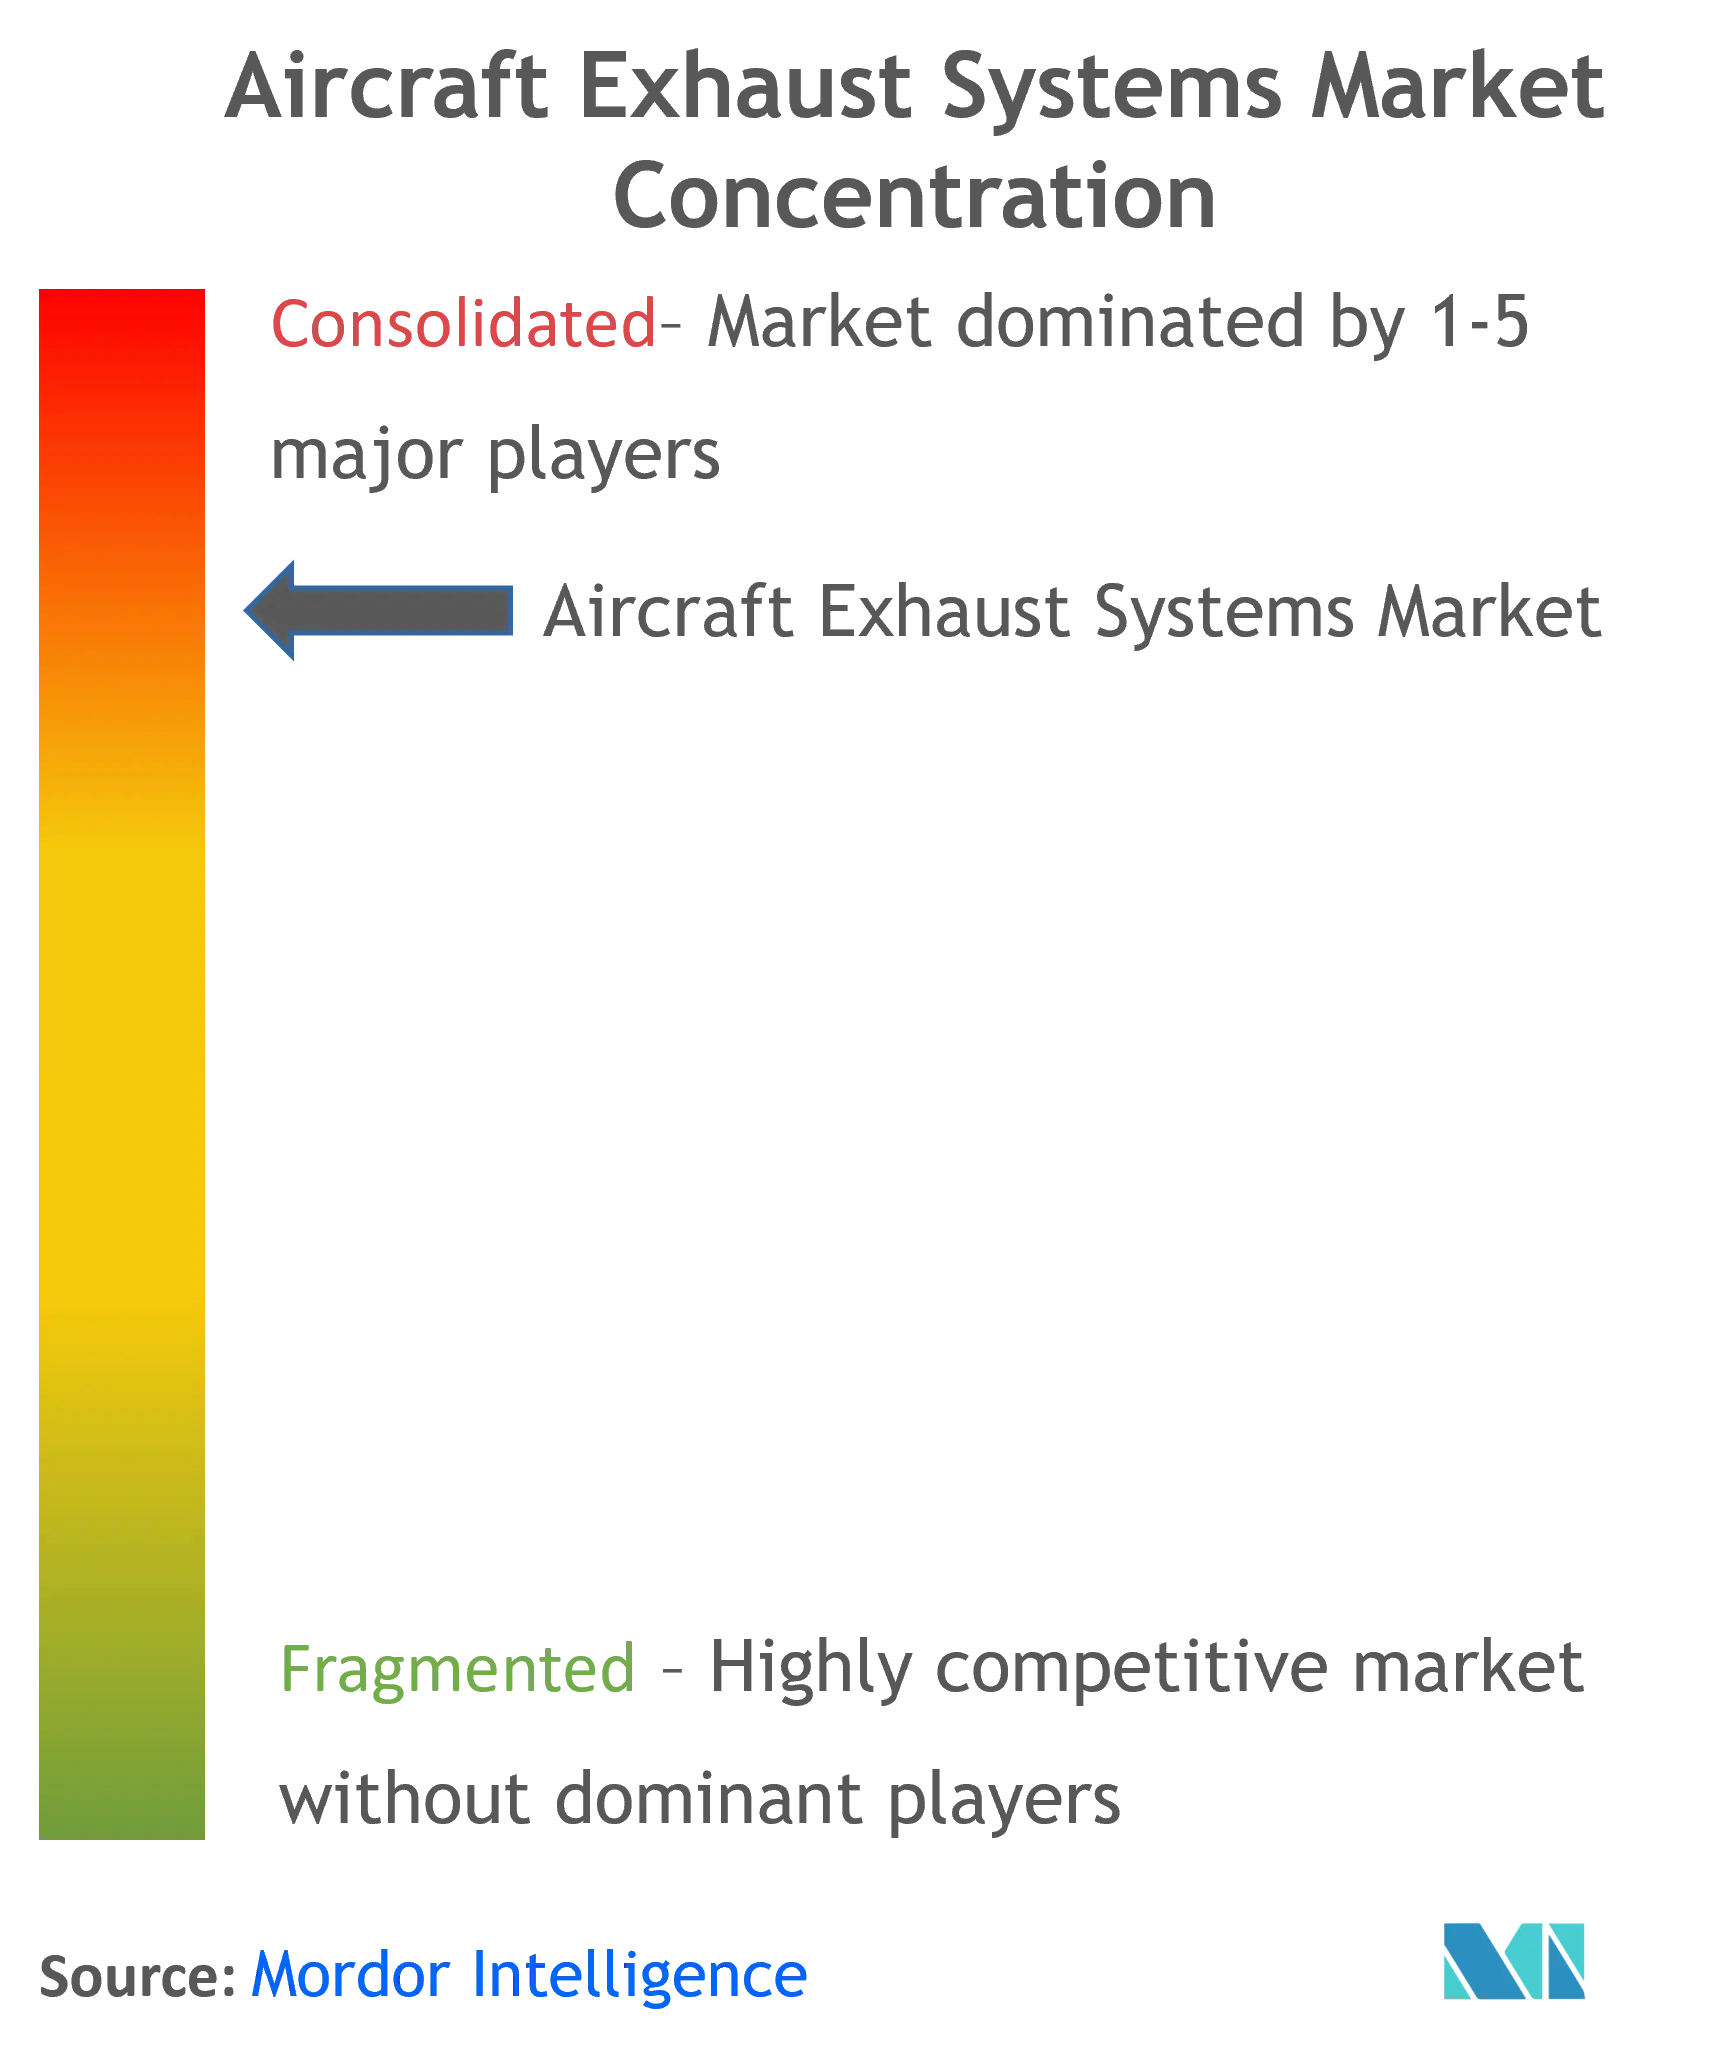 Aircraft Exhaust Systems Market Concentration